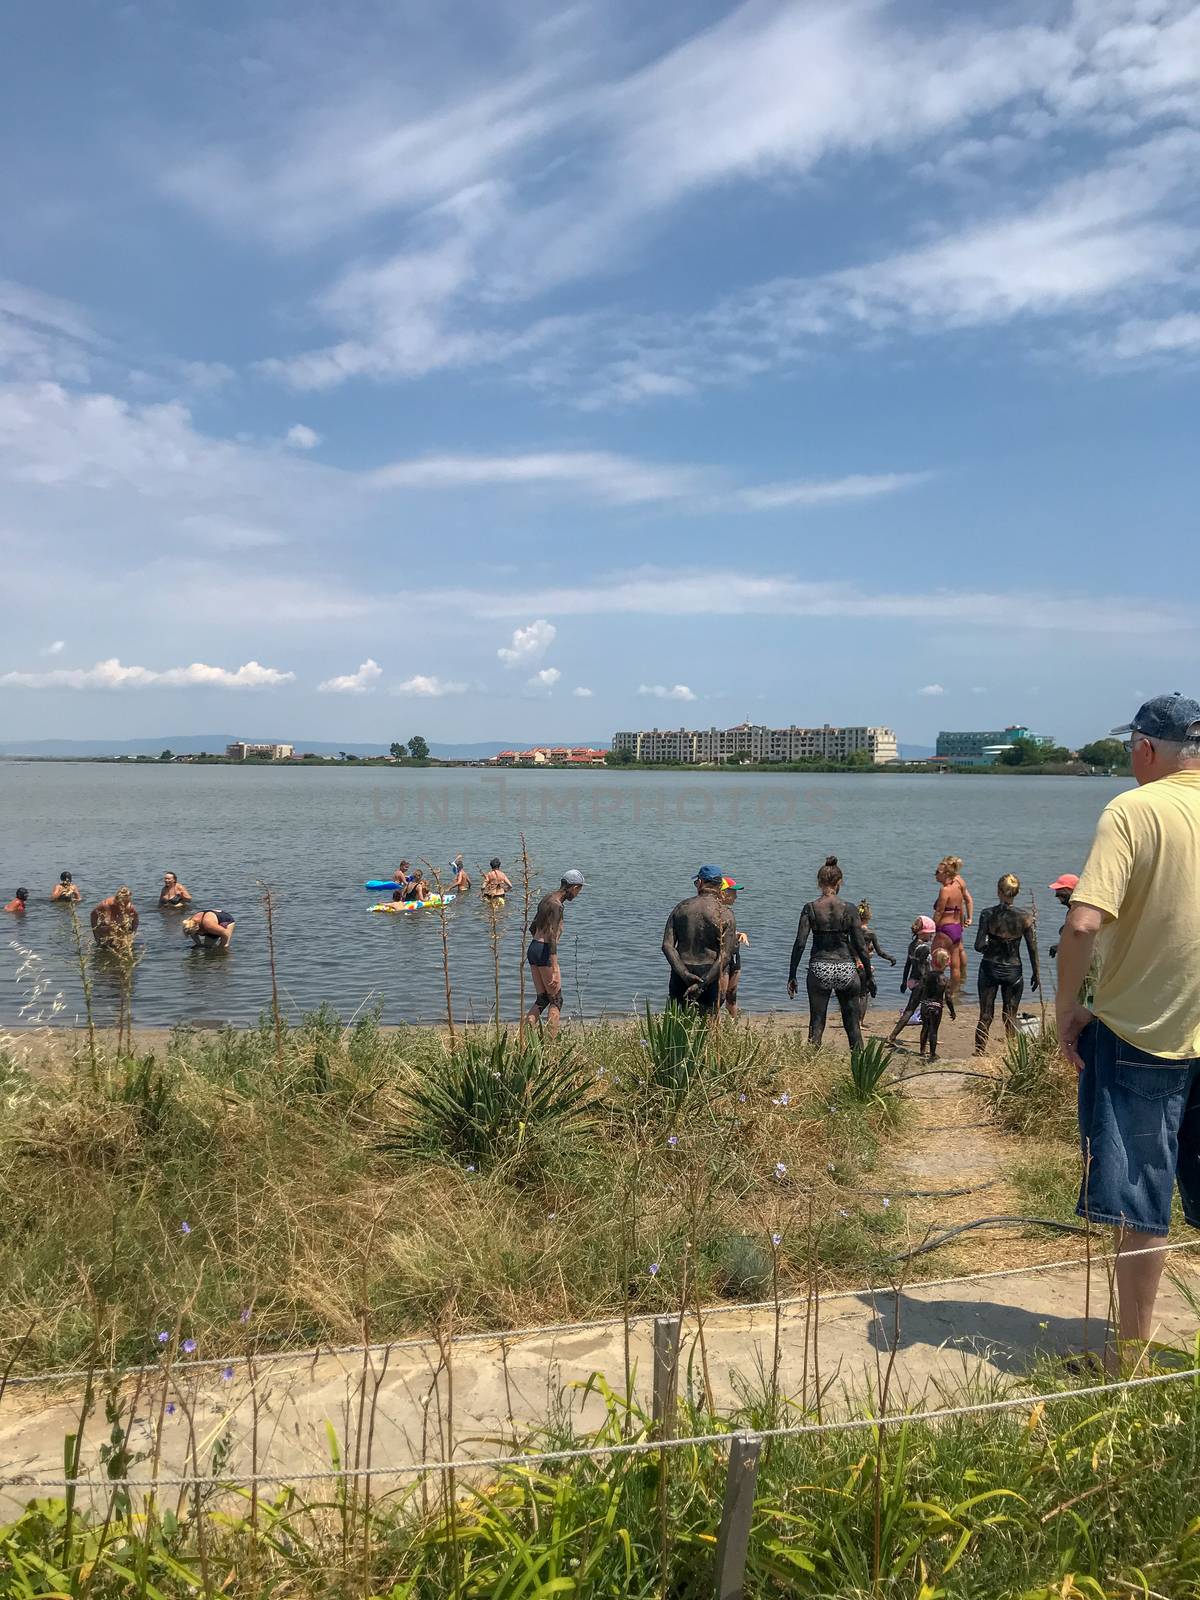 Pomorie, Bulgaria - July 05, 2019: People Visit Lake Pomorie. It Is An Natural Lagoon Which Is Also The Northernmost Lake Of The Burgas Lake Group.